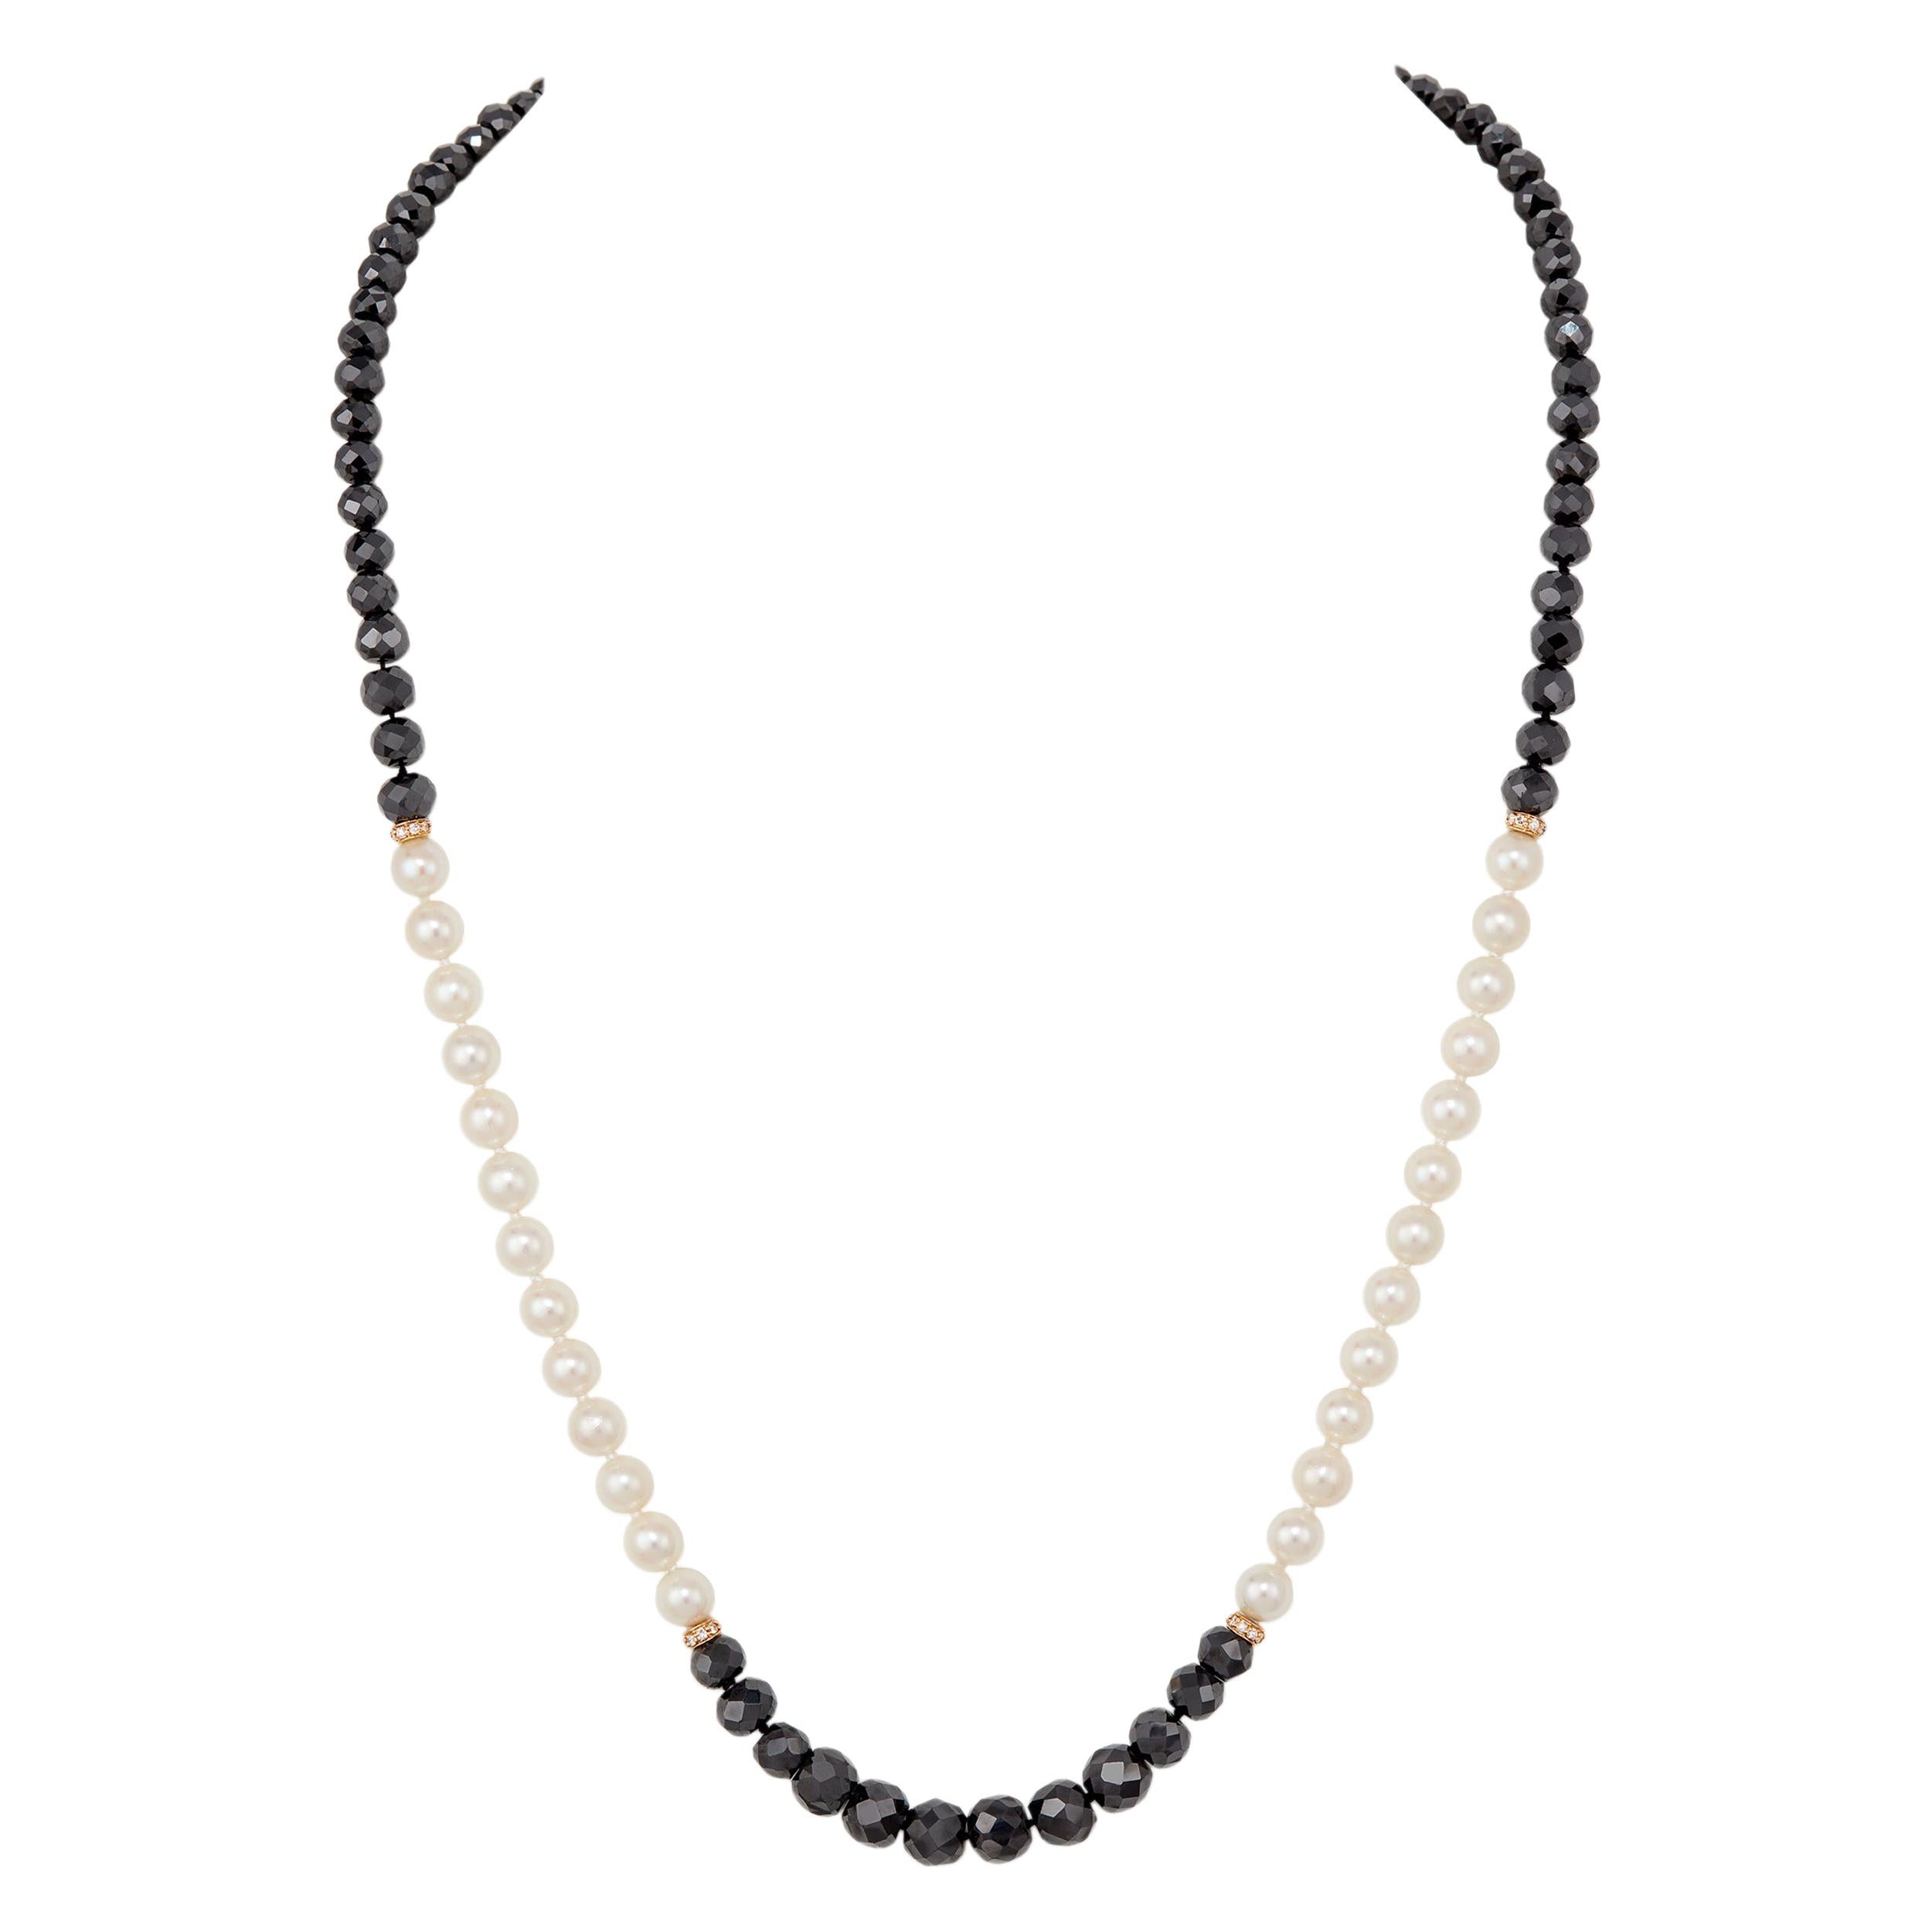 Black Diamond and Saltwater Cultured Pearl Mala Necklace with 18 Karat YG